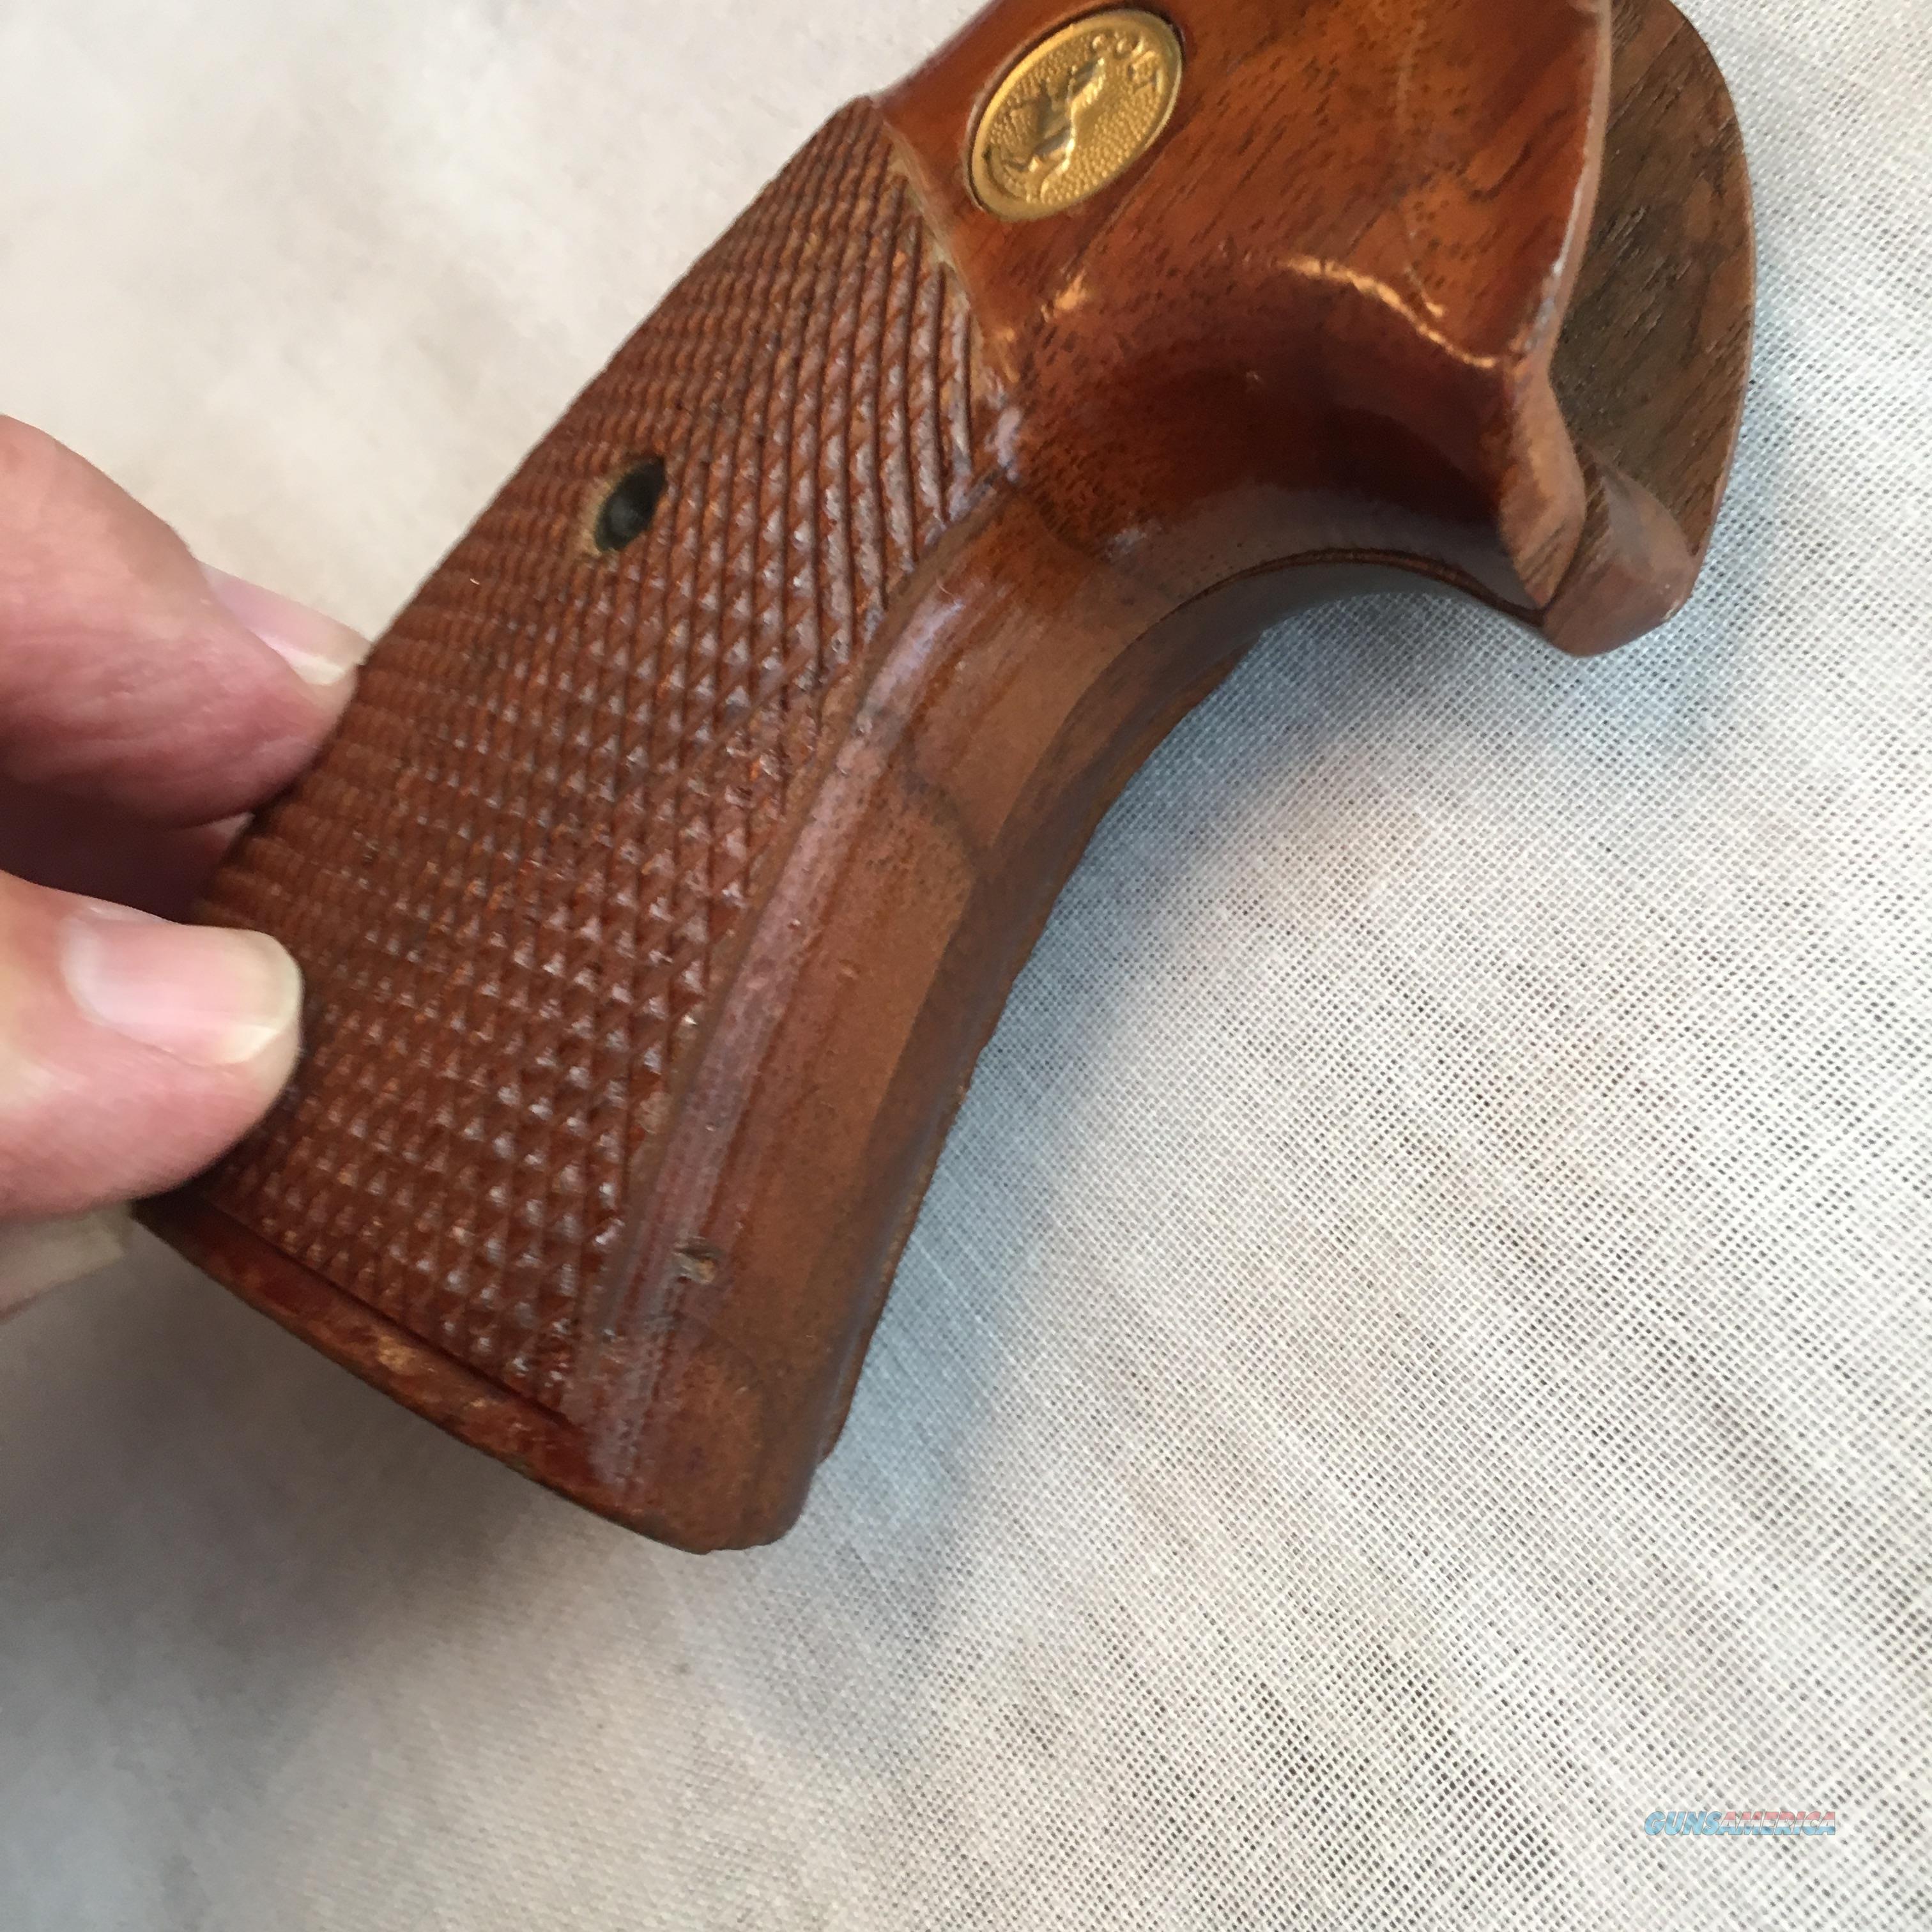 Colt Python Factory Wood Grips For Sale At 909355490 7997